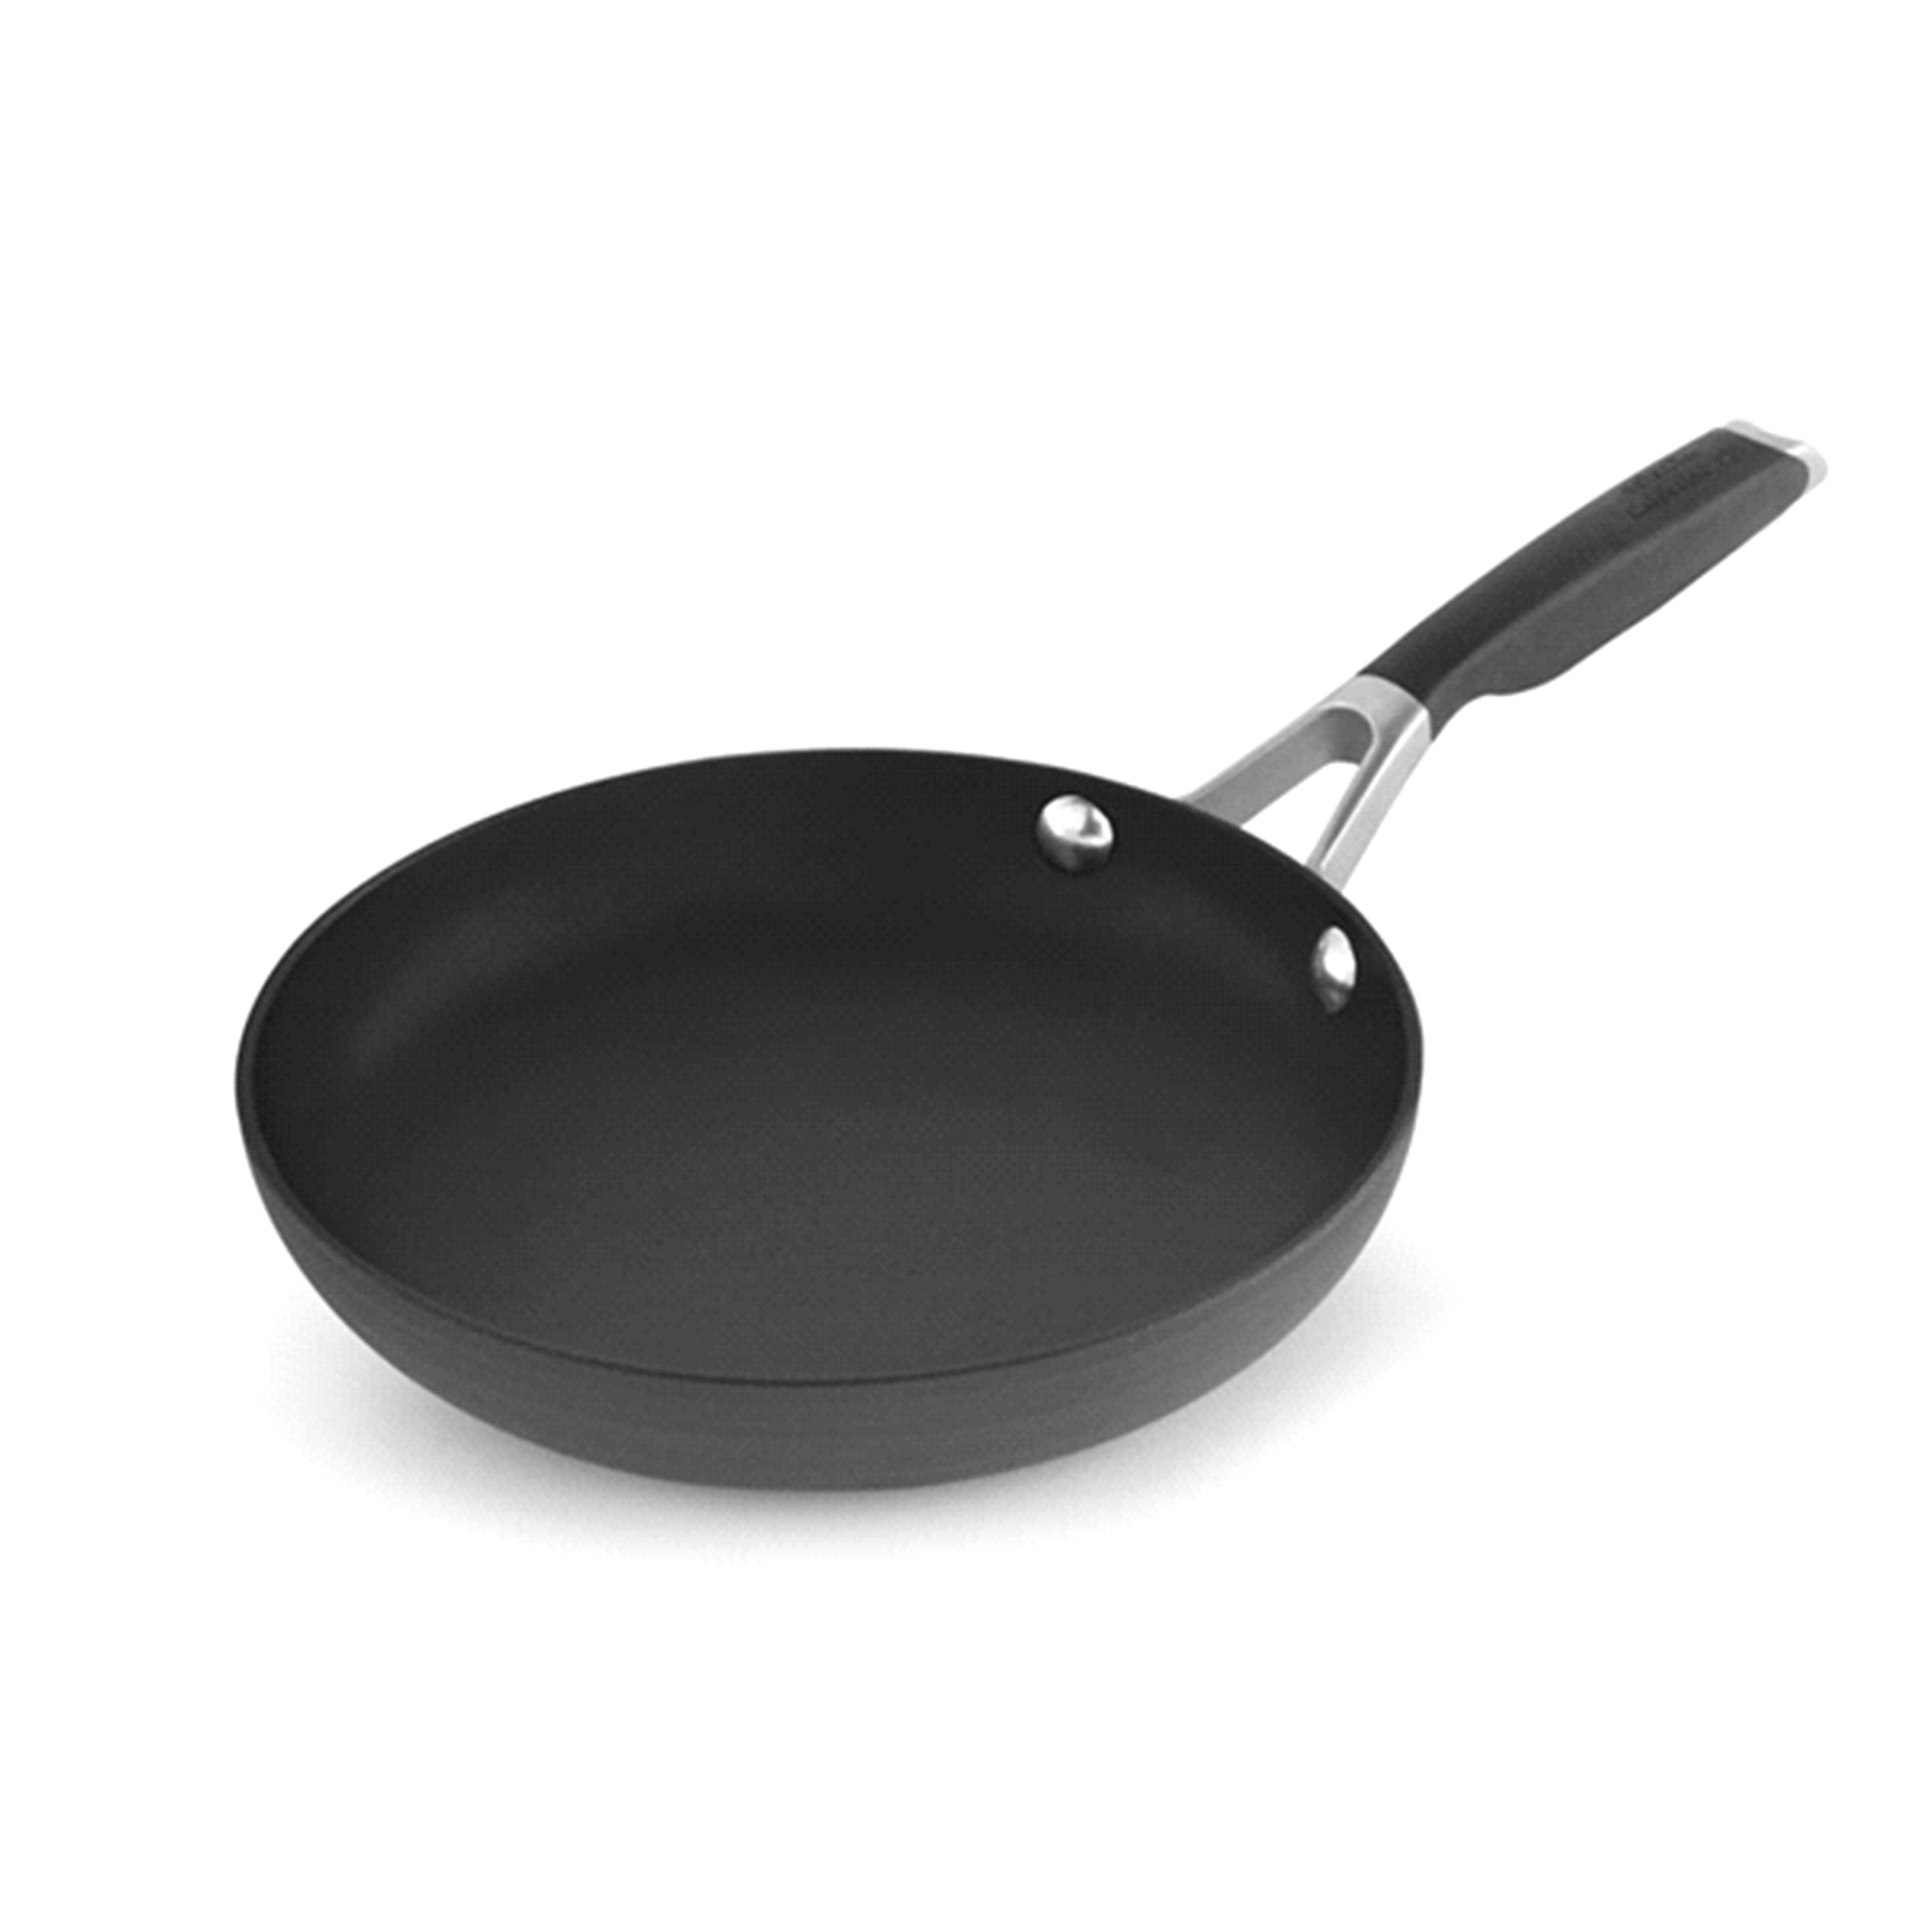 Select by Calphalon Hard-Anodized Nonstick 8-Inch Fry Pan 8 in